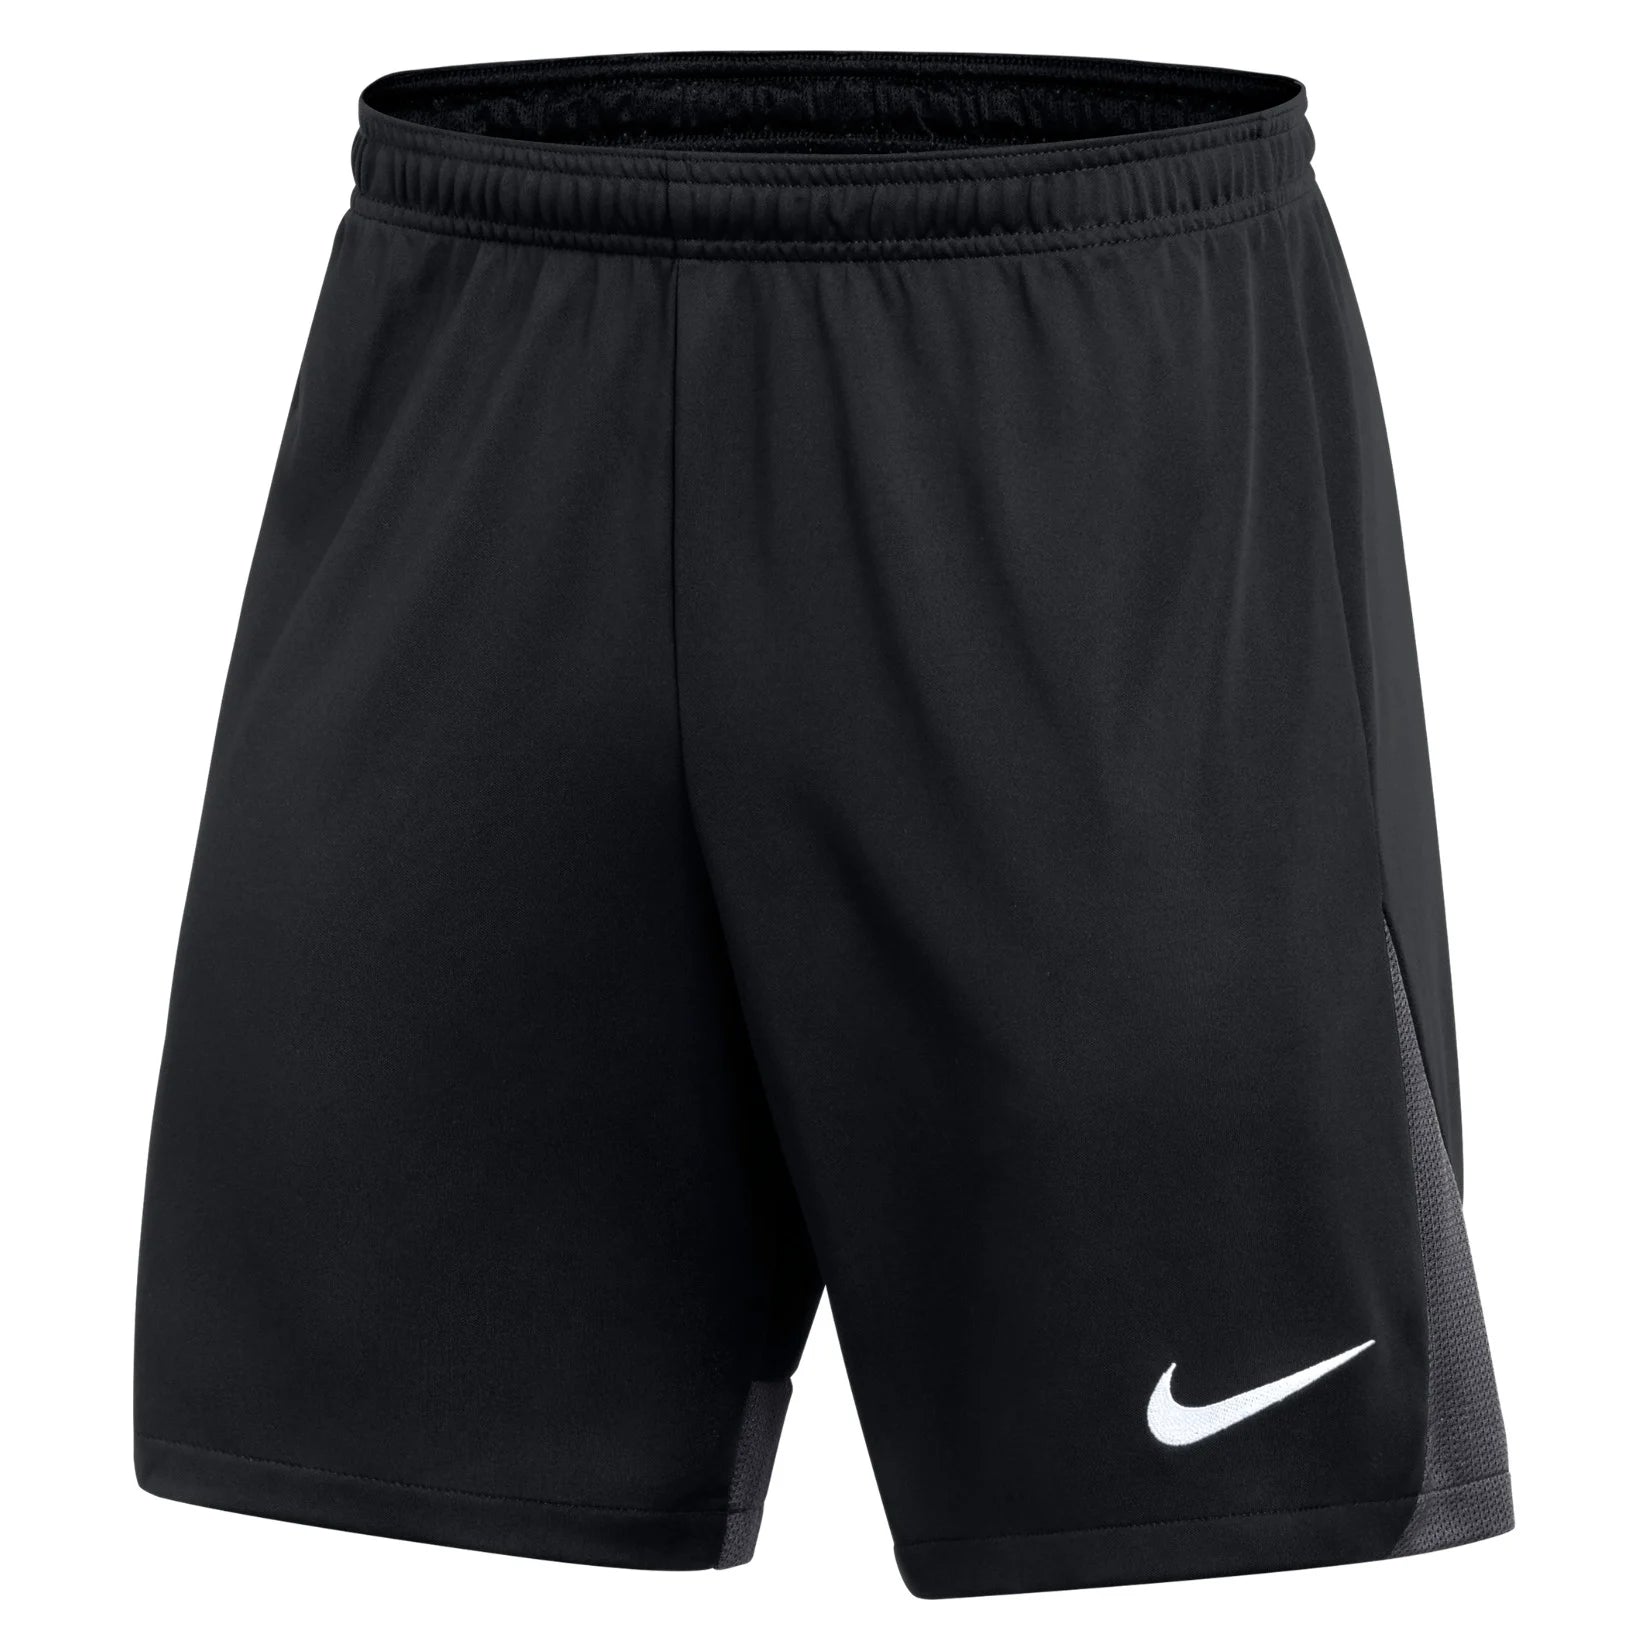 2023/24 Nike Referee Training Shorts - Small & 2XL Only